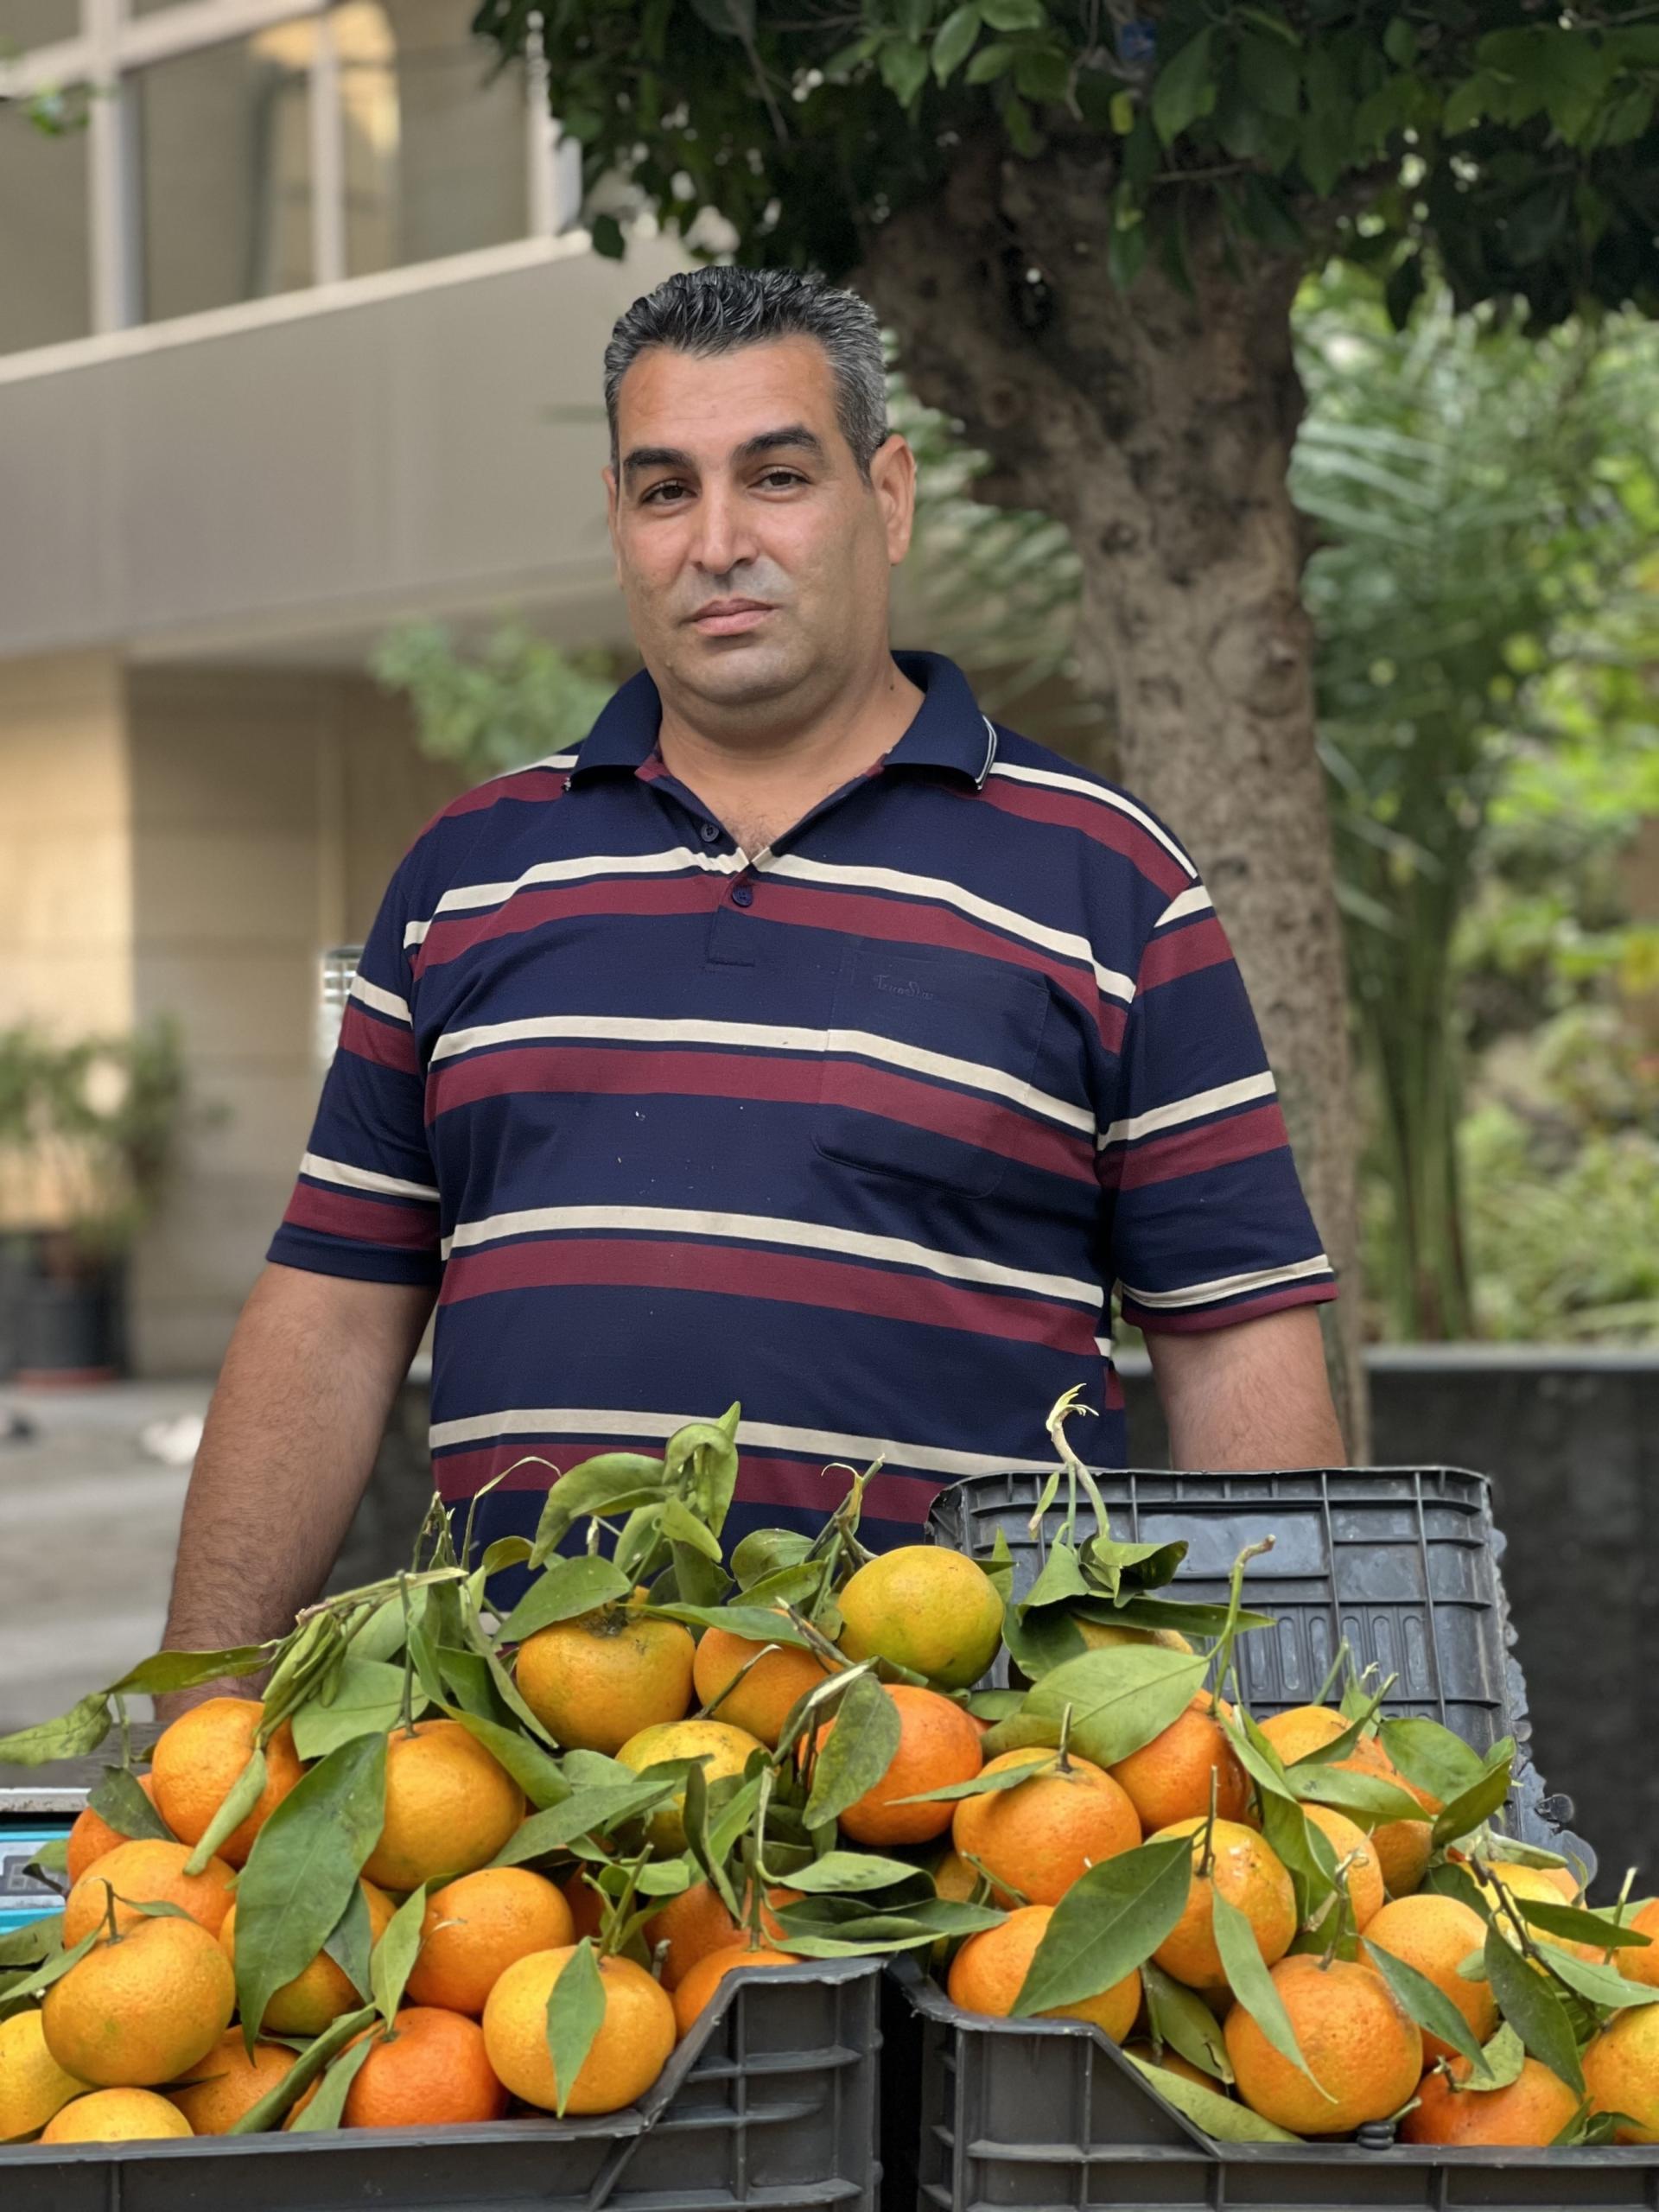 Forty-two-year-old Adnan Ziwani has been selling fruits on carts in Beirut for the past two decades. Just three months ago, he sold about 100 kilos (220 pounds) of grapes a day. Today, he says, he’s lucky if he sells 35 kilos (77 pounds.)